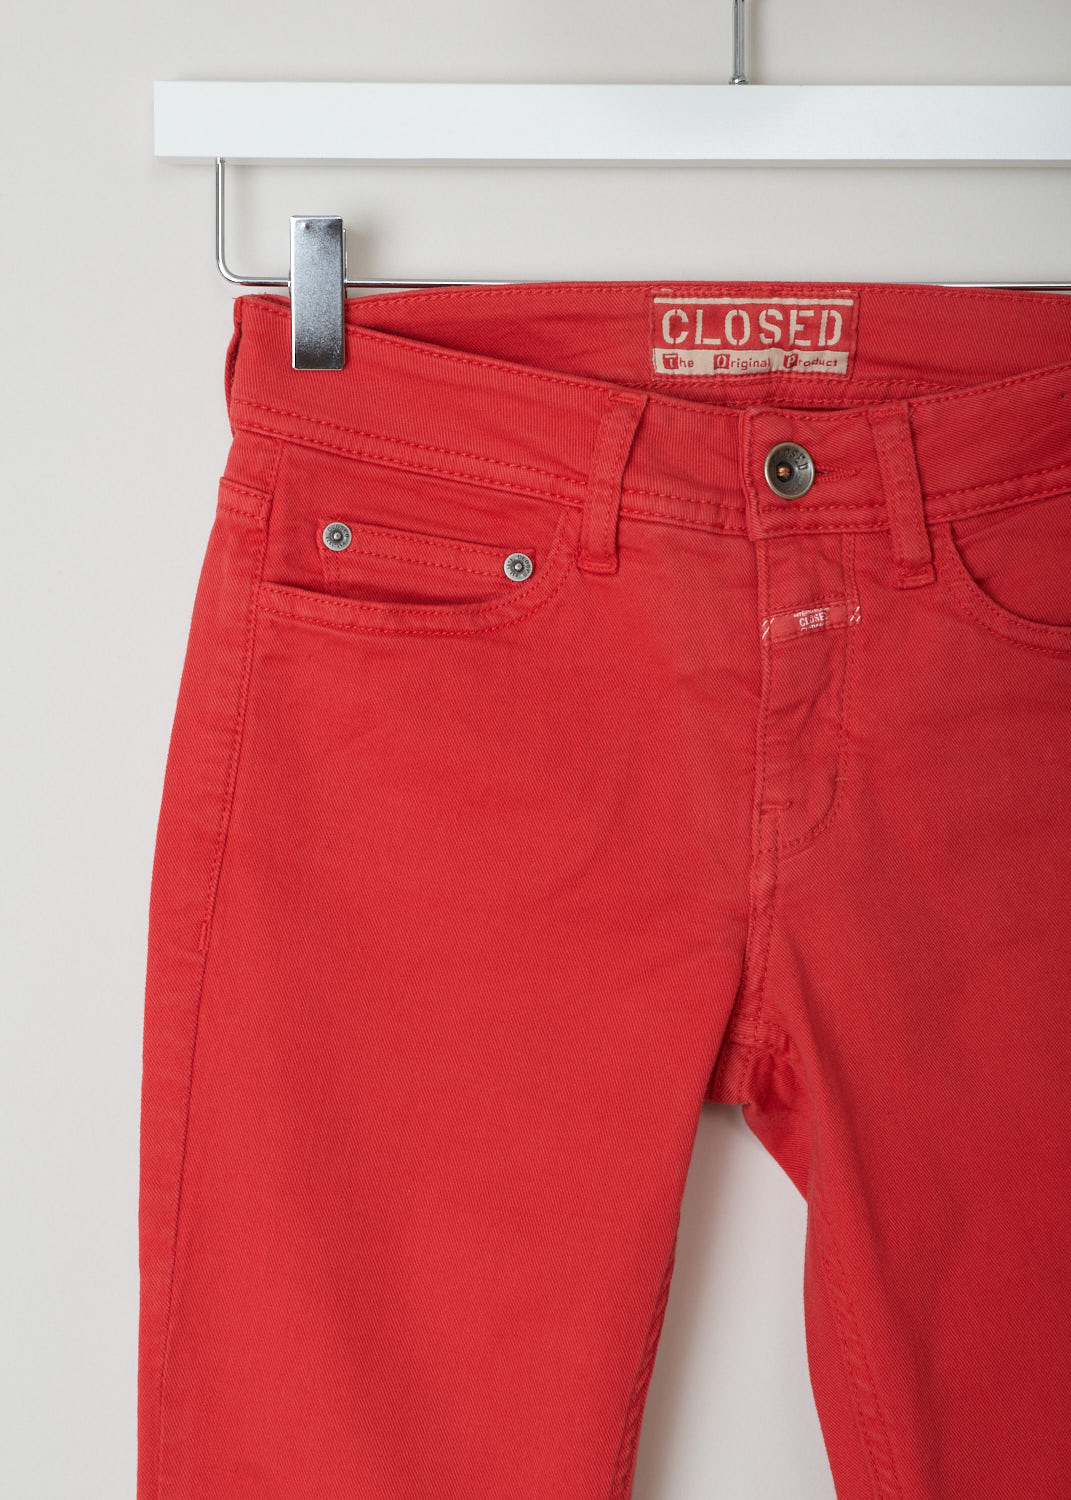 Closed, Slim-fit mid-waist red jeans, baker_C91833_07N_3L_343, red, detail, Mid-waist slim-fit jeans made with cropped length, to show off any shoe you are wearing. Comes with the traditional 5 pockets and as you fastening option you get a zipper and button on the front. 